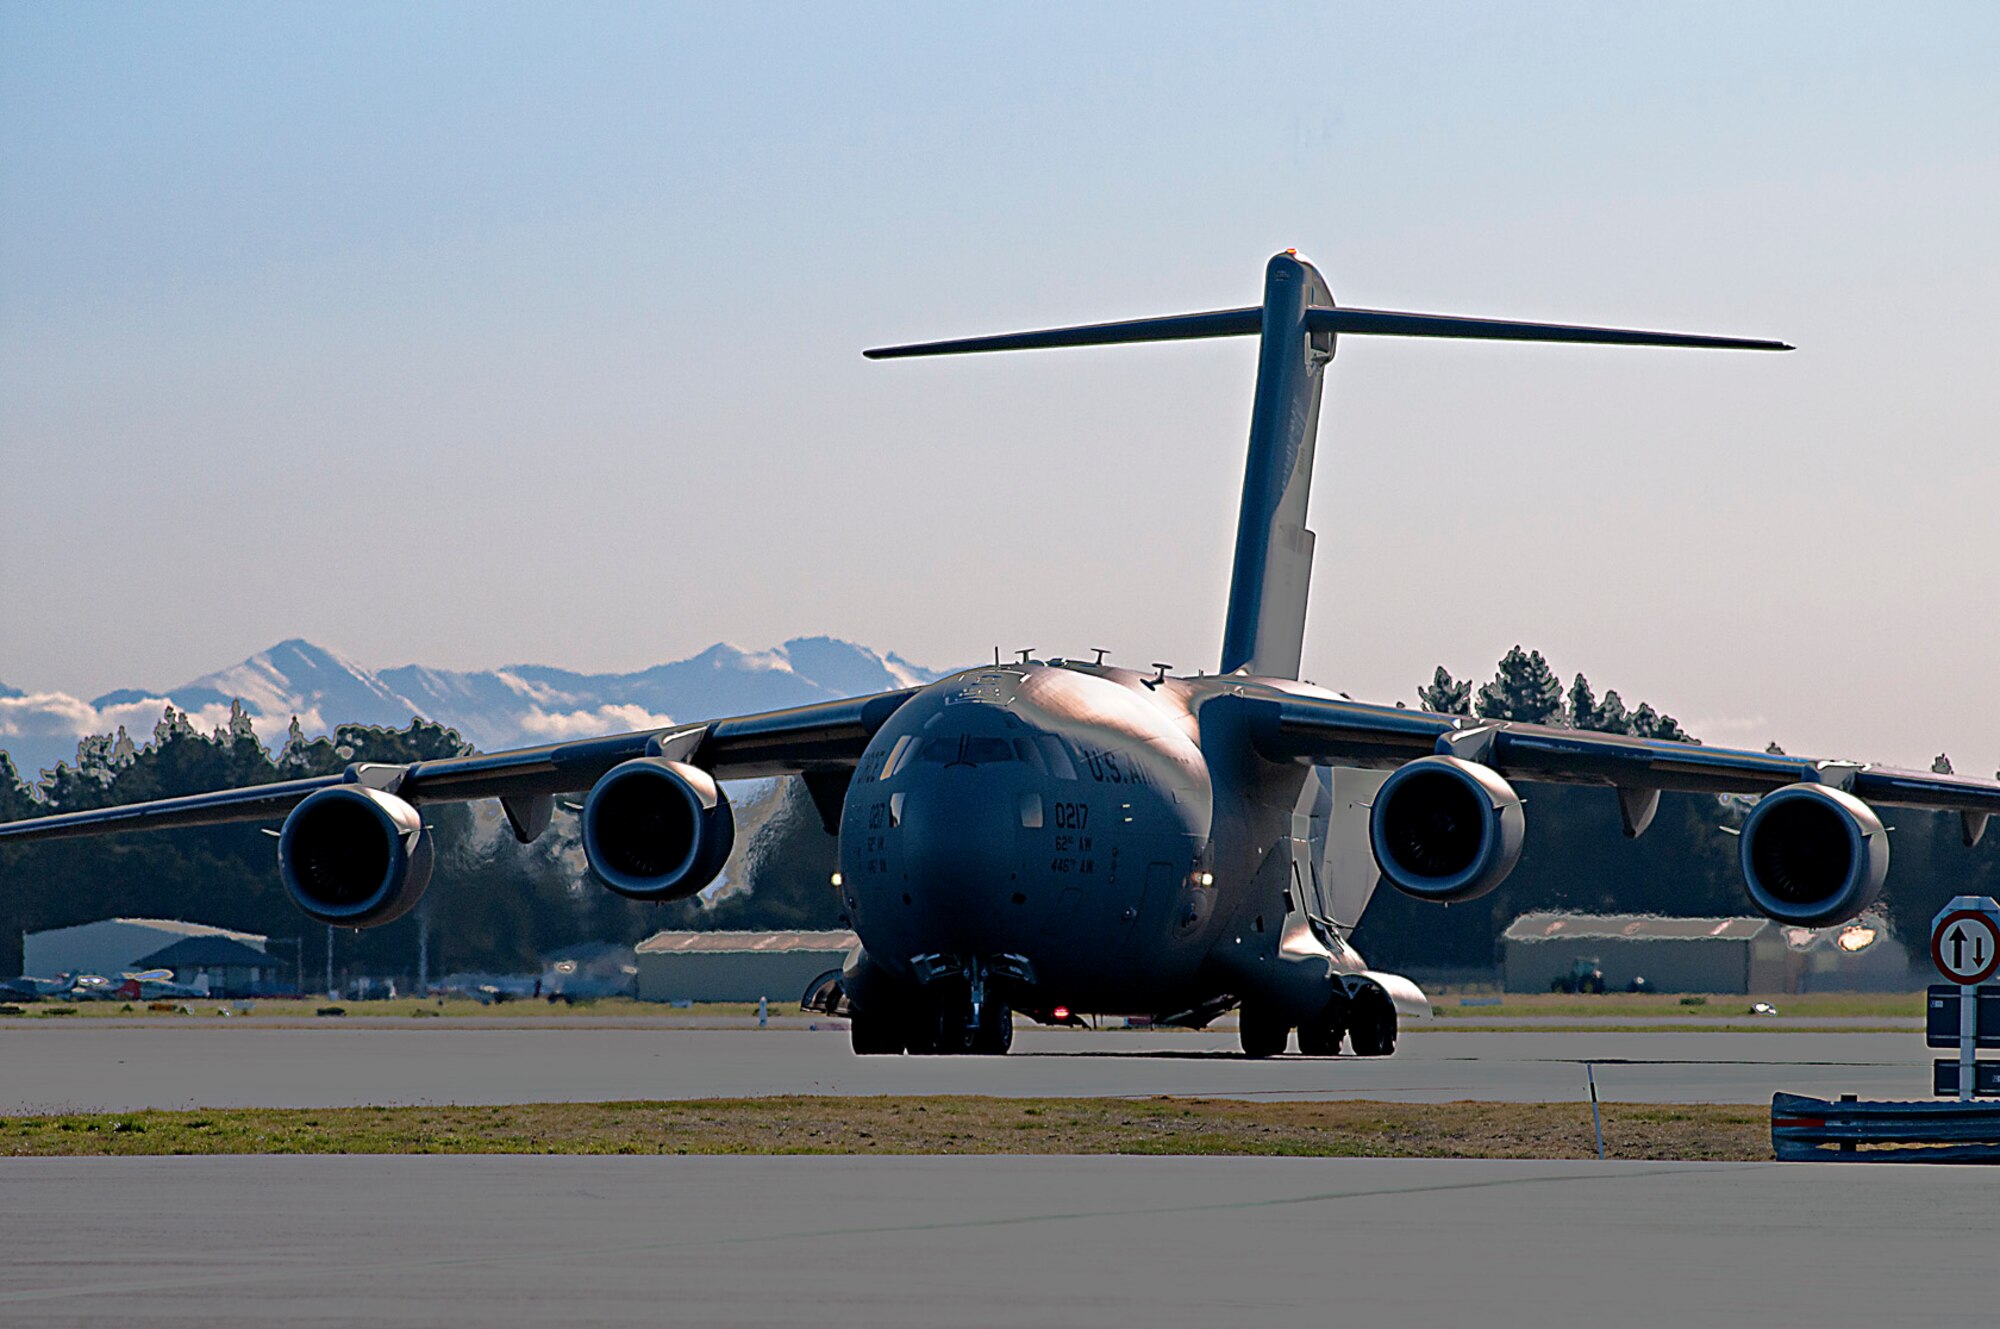 A U.S. Air Force C-17 Globemaster III from Joint Base Lewis-McChord, Washington, taxis to a parking spot at Christchurch International Airport, New Zealand, Aug. 21, 2015. The aircraft was used to fly missions to Antarctica in support of the U.S. Antarctic Program’s WINFLY, in preparation for Operation DEEP Freeze, a multi-agency operation that is the military component of USAP and is managed by the National Science Foundation. (U.S. Air Force photo by Senior Airman Madelyn McCullough/Released)